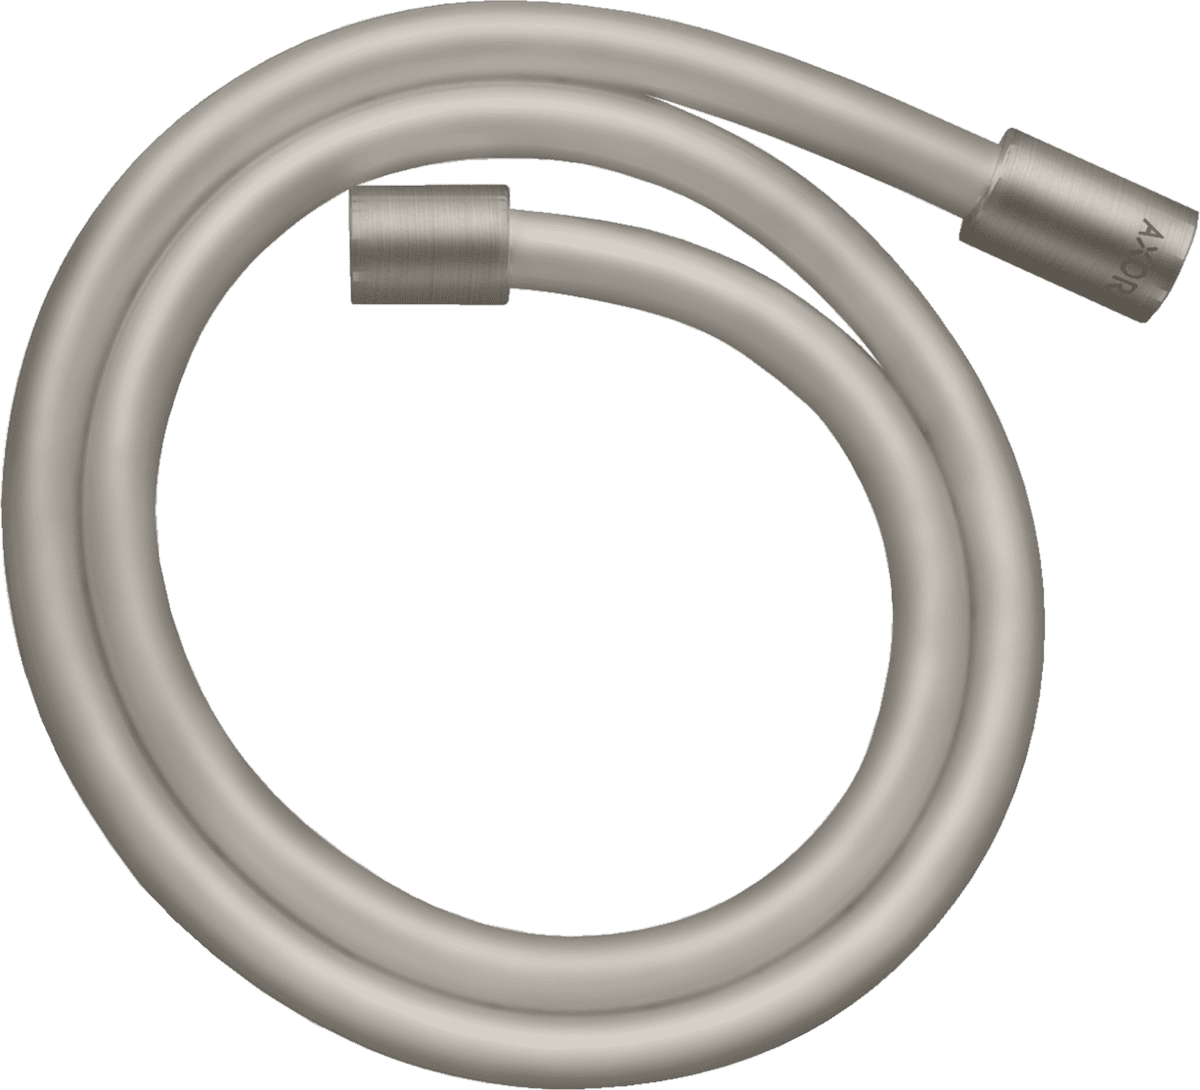 Picture of HANSGROHE AXOR Starck Metal effect shower hose 2.00 m with cylindrical nuts #28284800 - Stainless Steel Optic